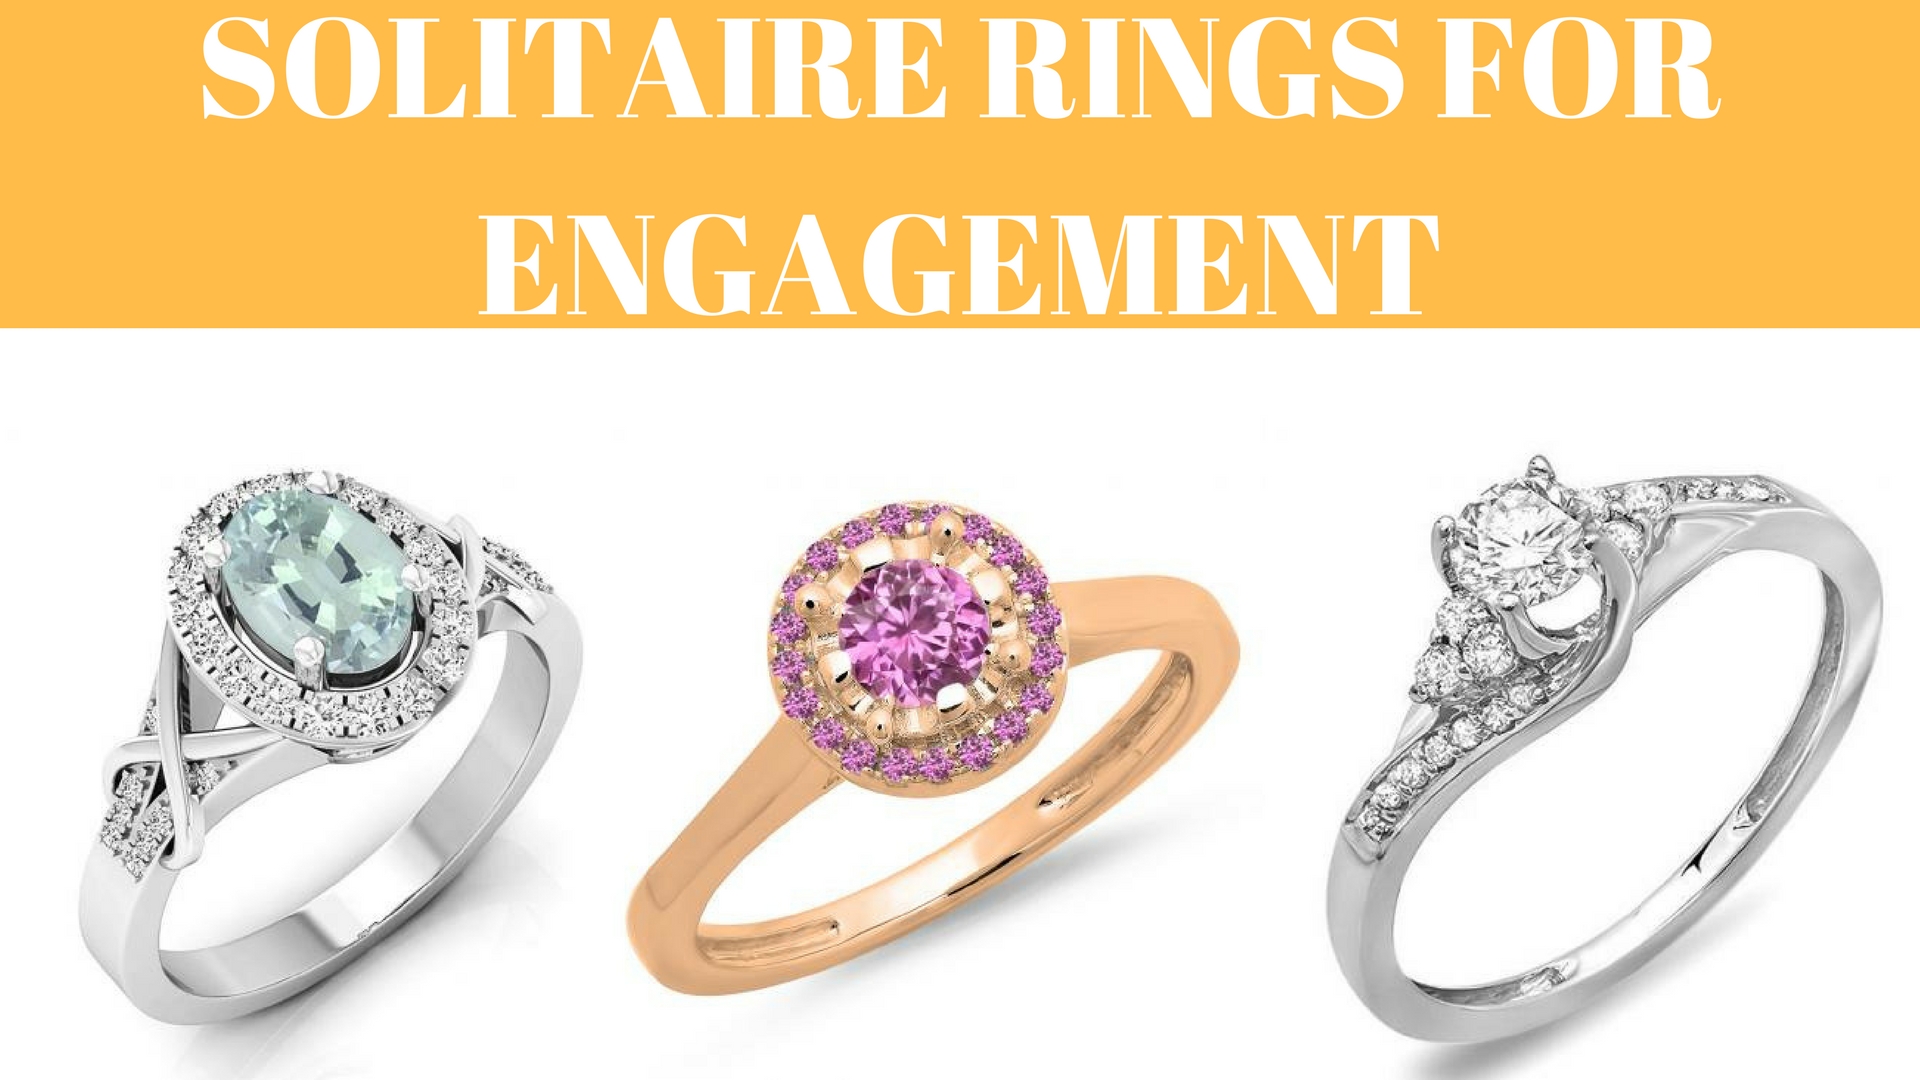 Should I buy Solitaire Rings For Engagement - Pros and Cons